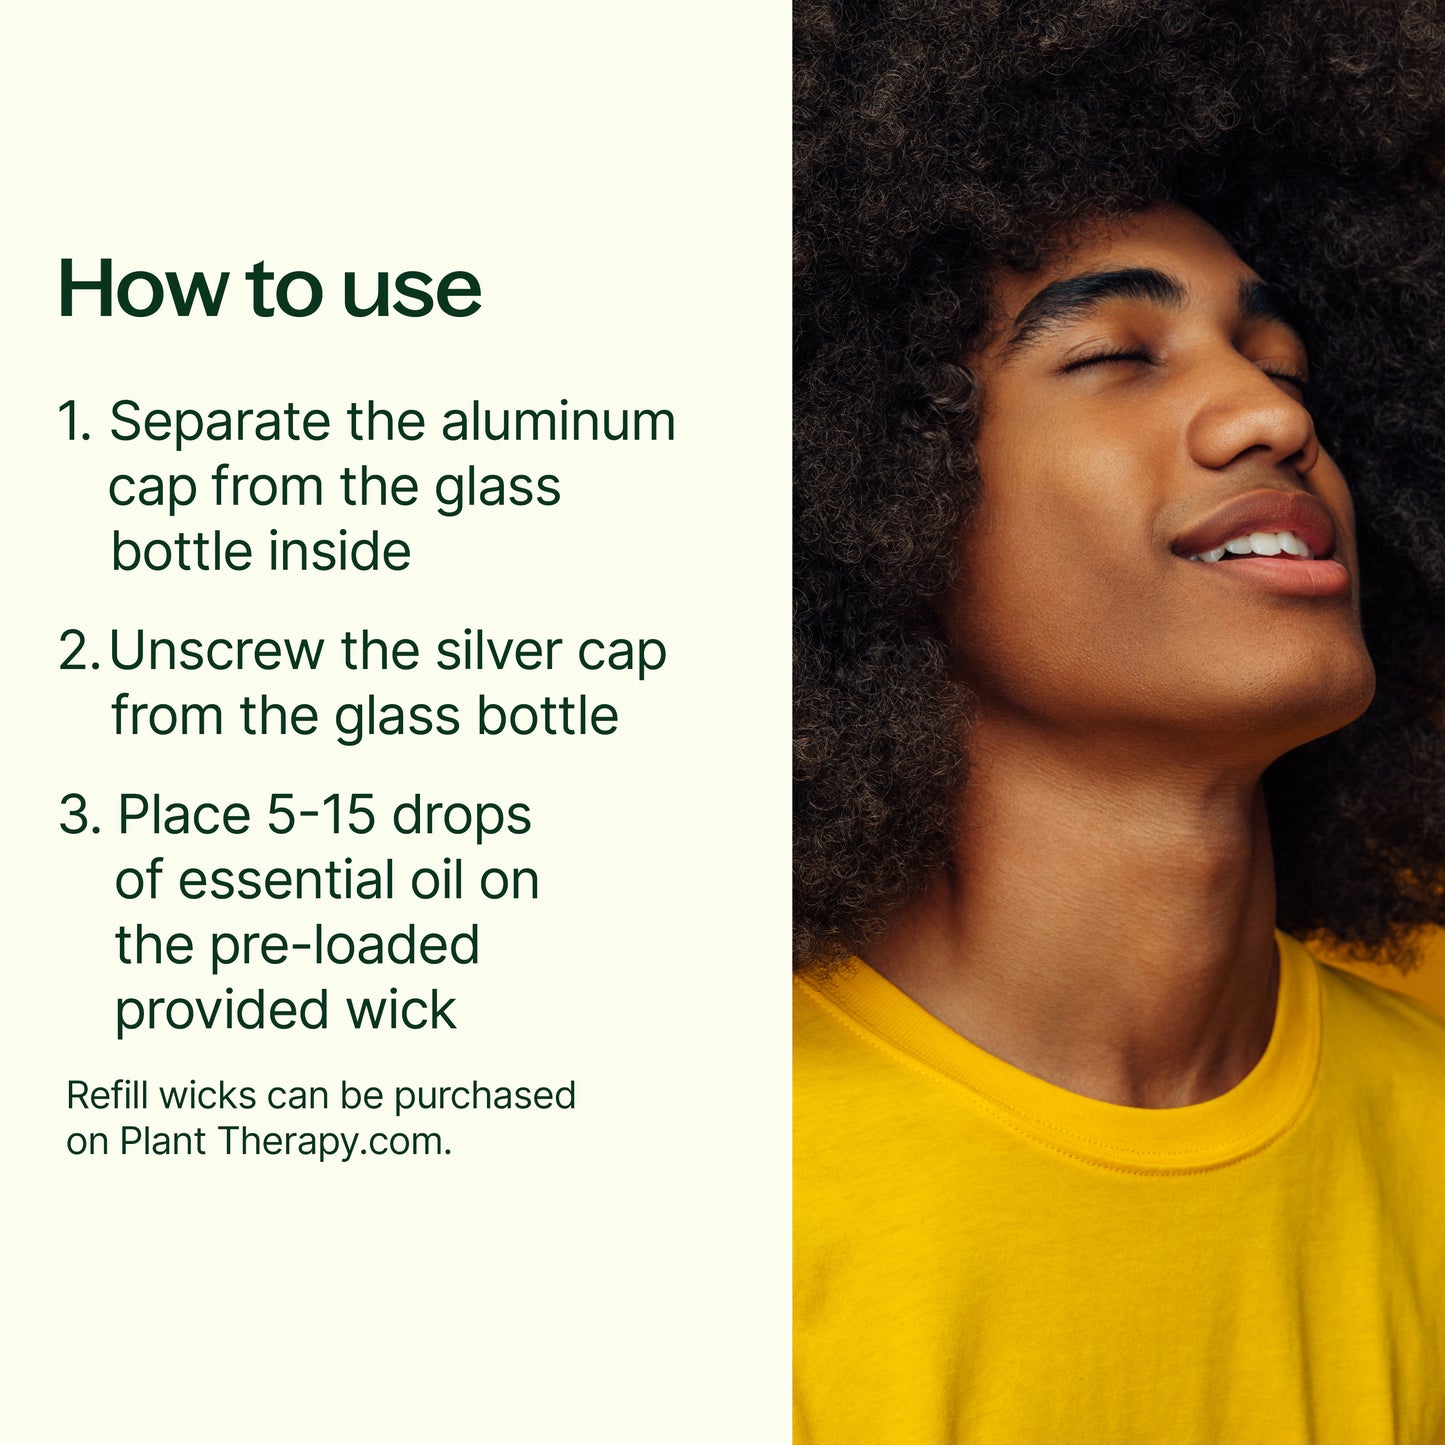 How to use: 1. separate the aluminum cap from the glass bottle inside. 2. Unscrew the silver cap from the glass bottle. 3. Place 5-15 drops of essential oil on the pre-loaded wick